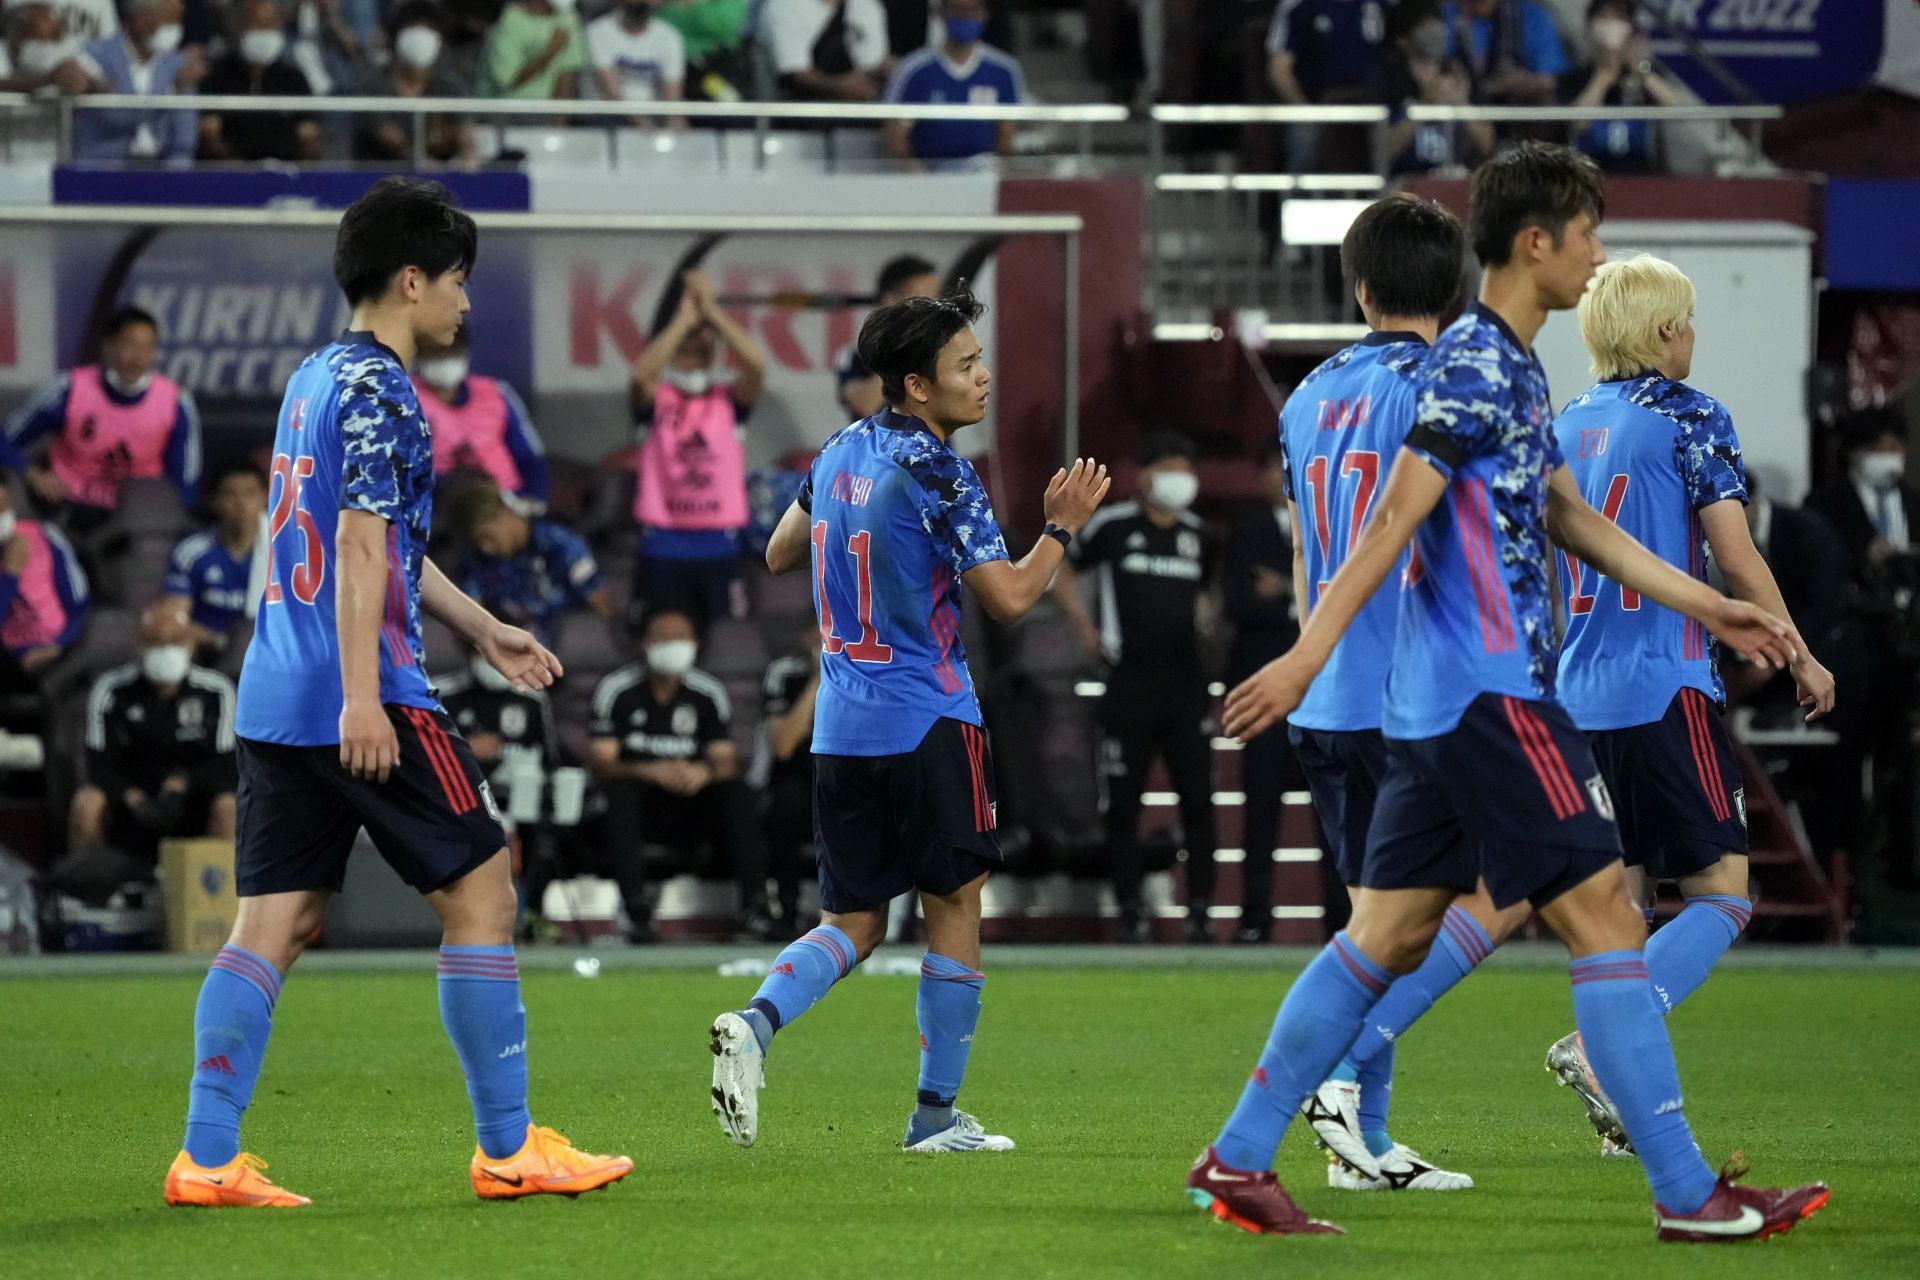 Japan and Tunisia will meet in the Kirin Cup final on Tuesday